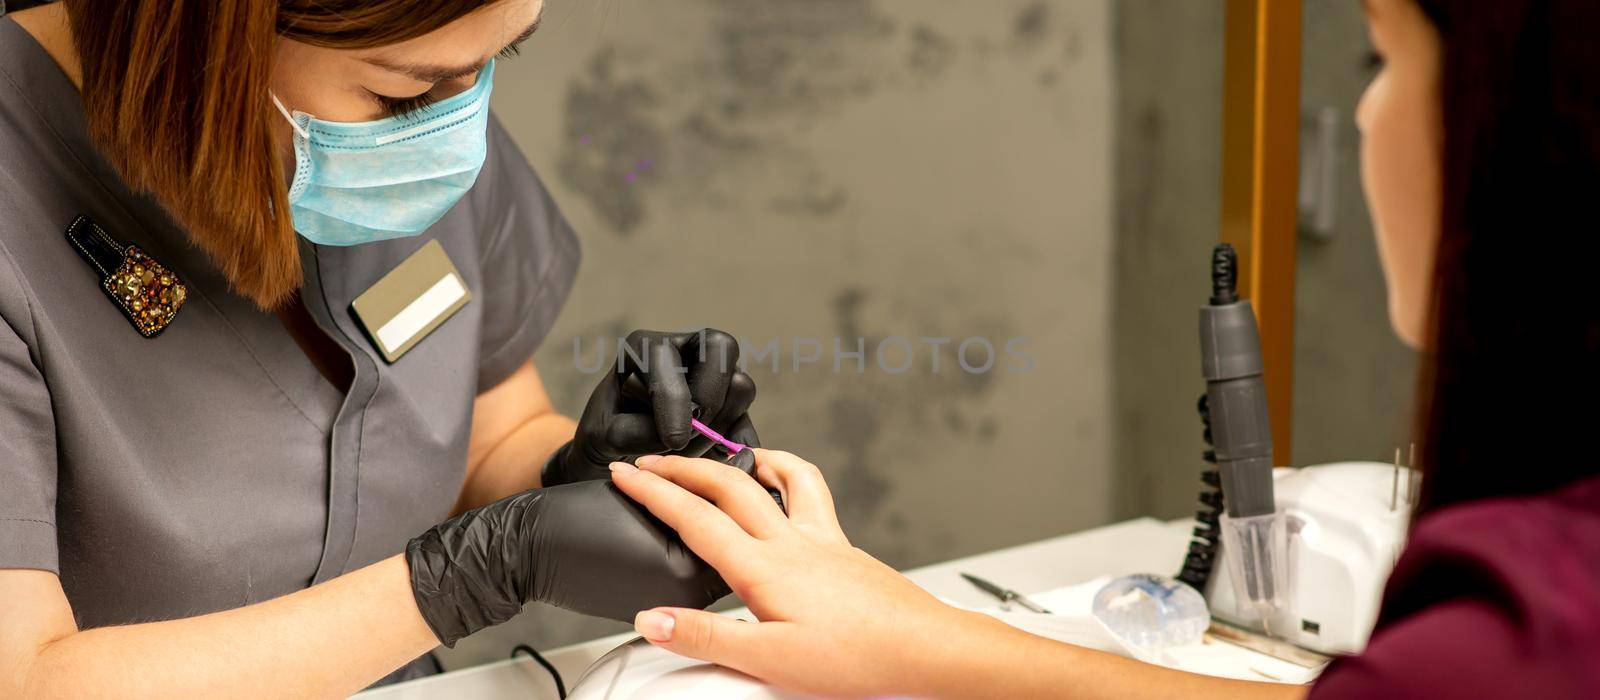 Professional manicure. A manicurist is painting the female nails of a client with purple nail polish in a beauty salon, close up. Beauty industry concept. by okskukuruza